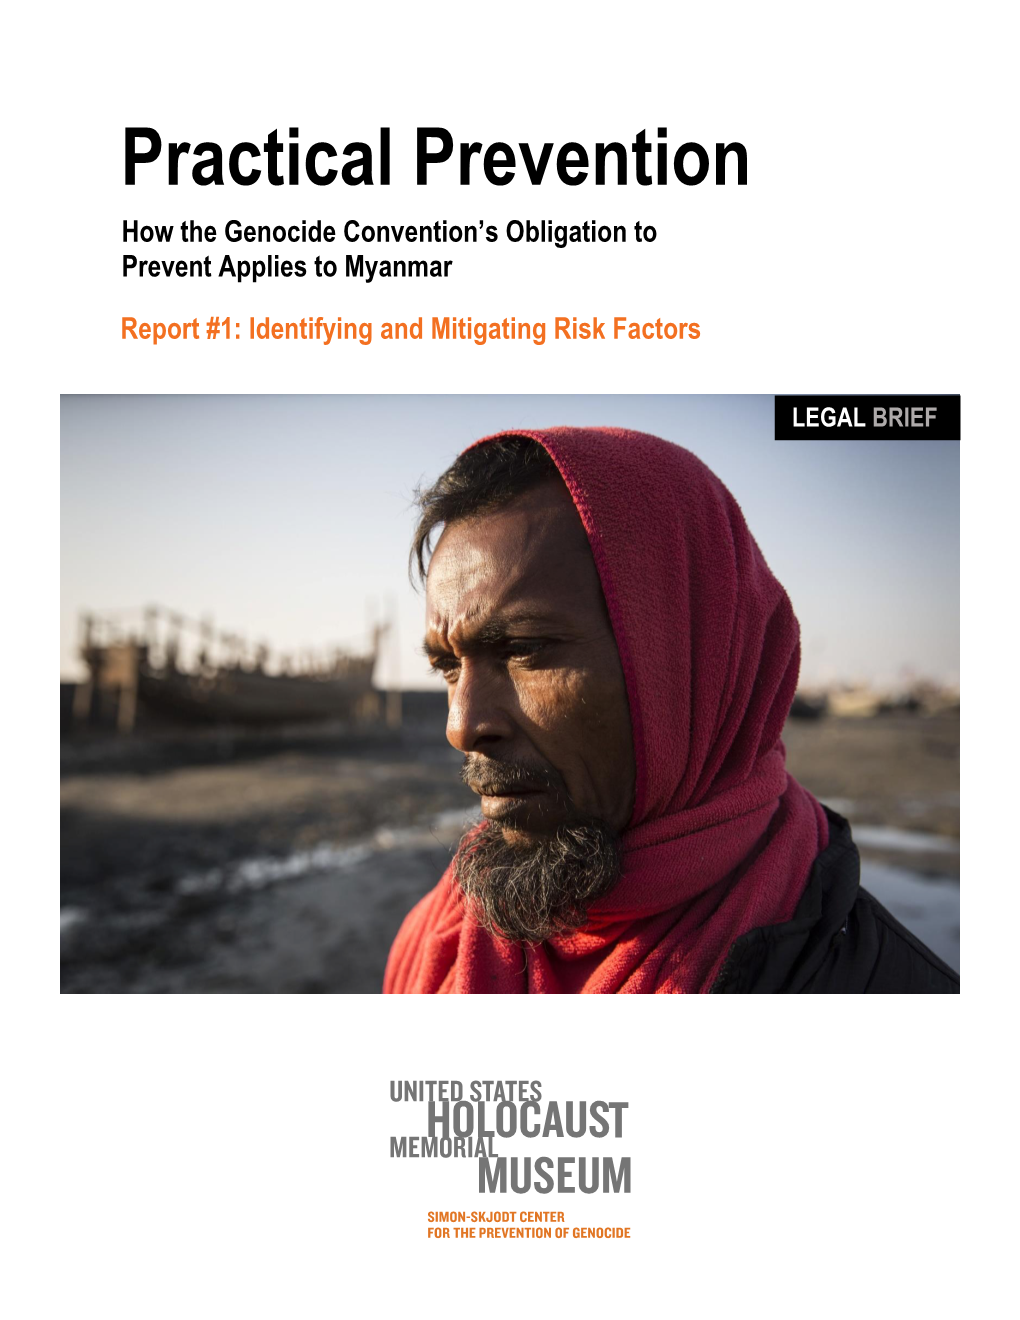 Practical Prevention: How the Genocide Convention's Obligation